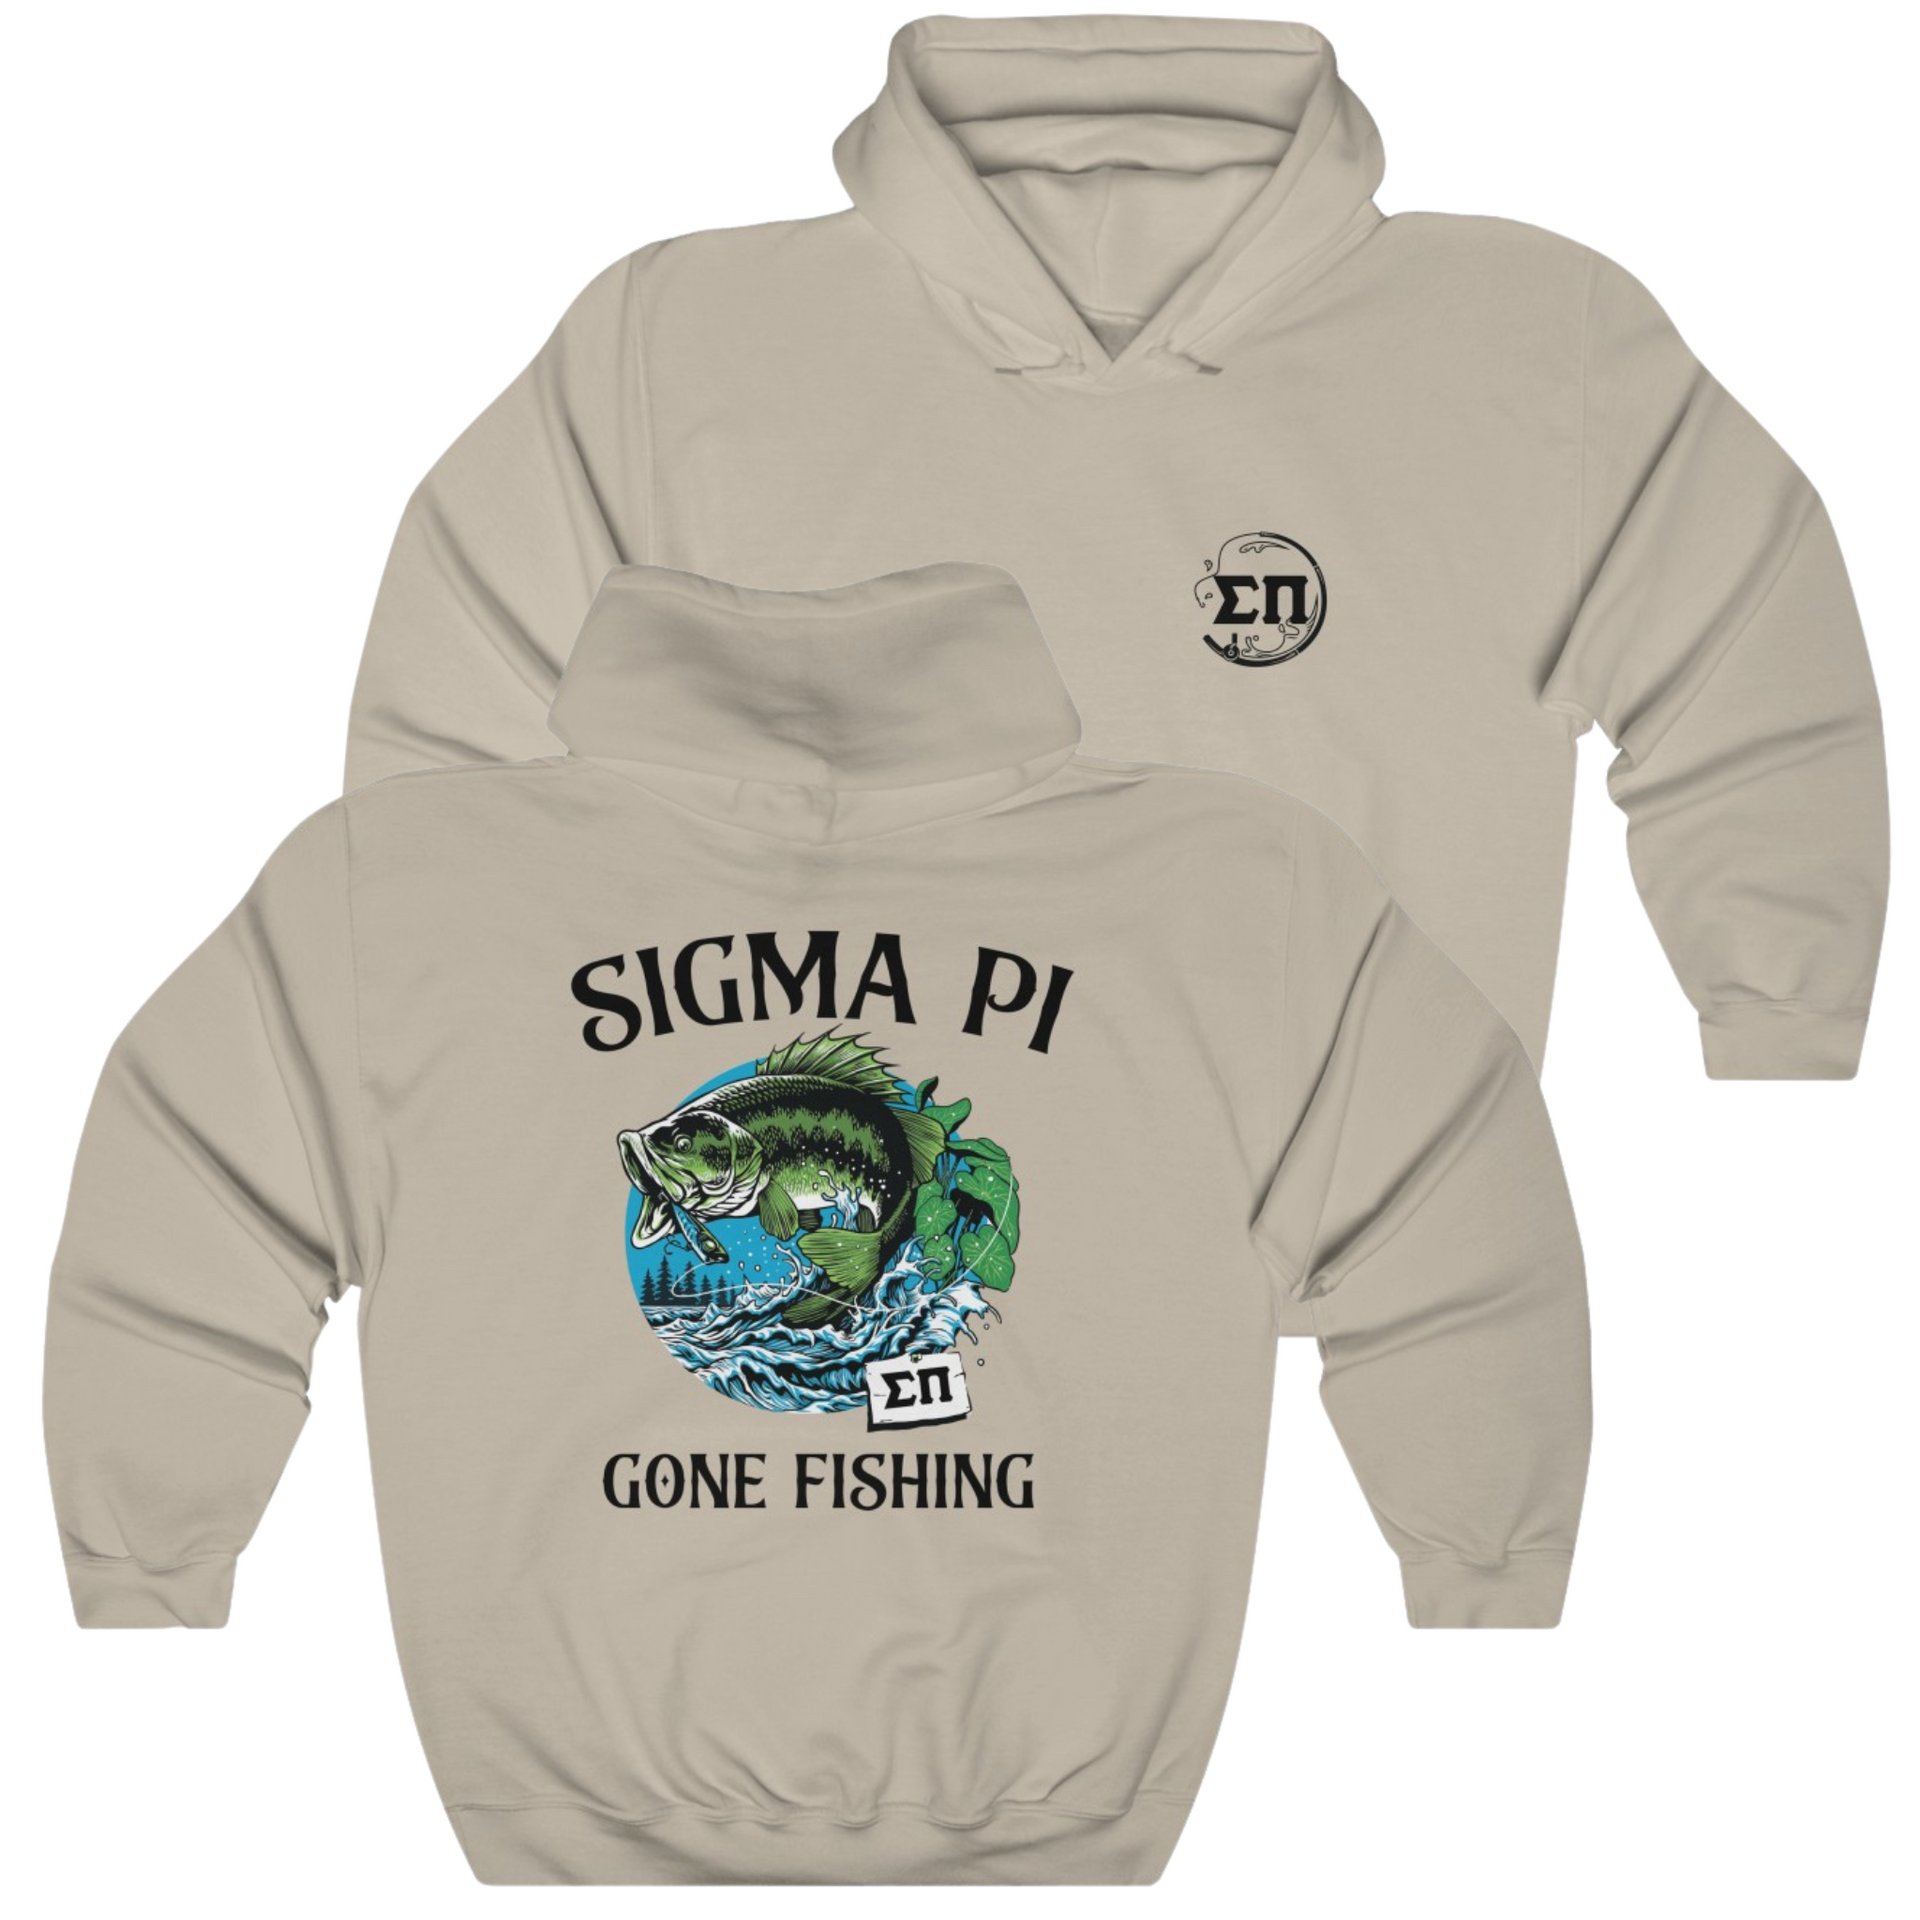 Sand Sigma Pi Graphic Hoodie | Gone Fishing | Sigma Pi Apparel and Merchandise